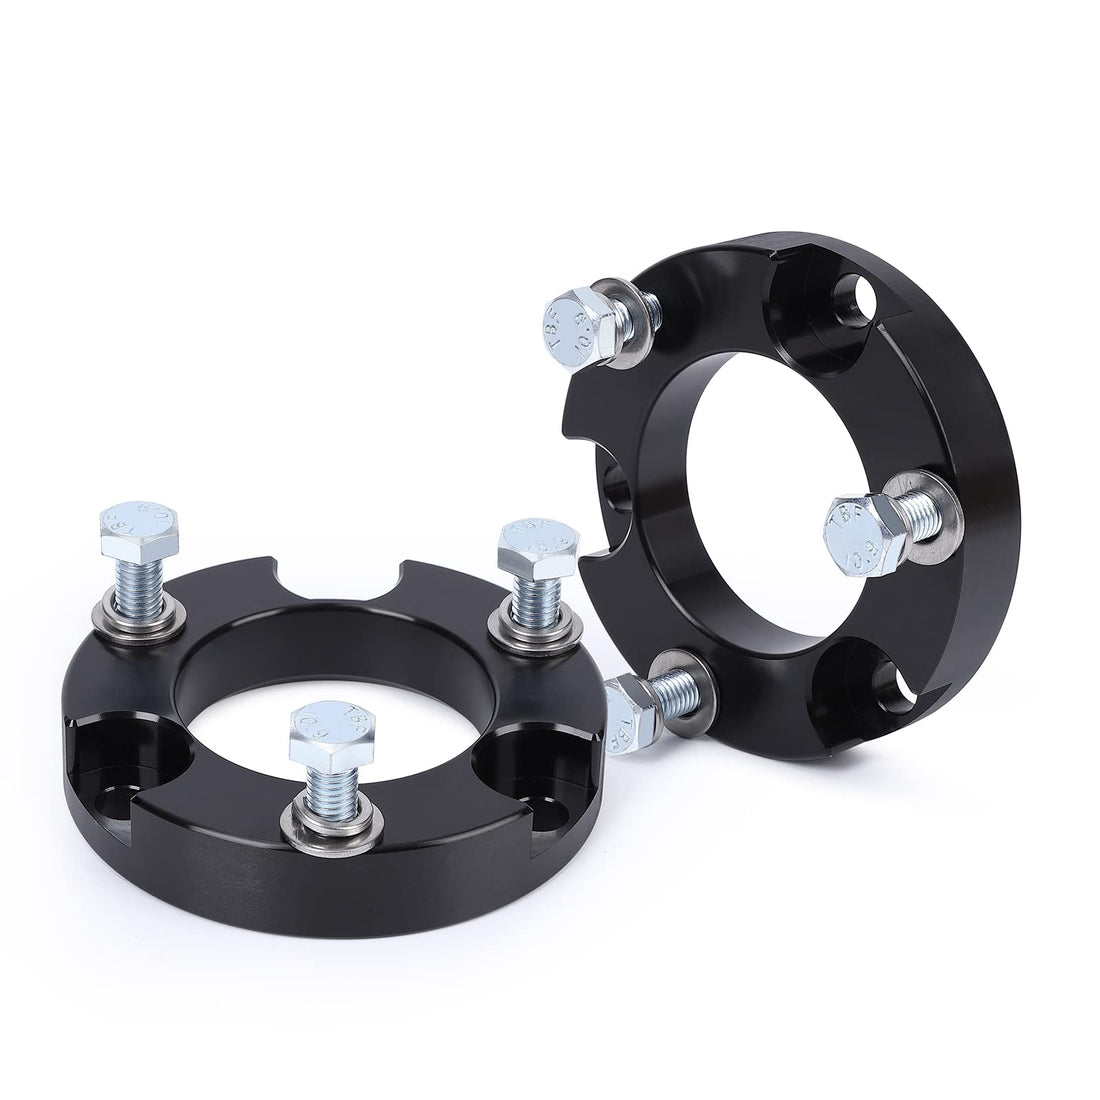 2 Inch Front Strut Spacer Suspension Lift Kit Lift Spacers